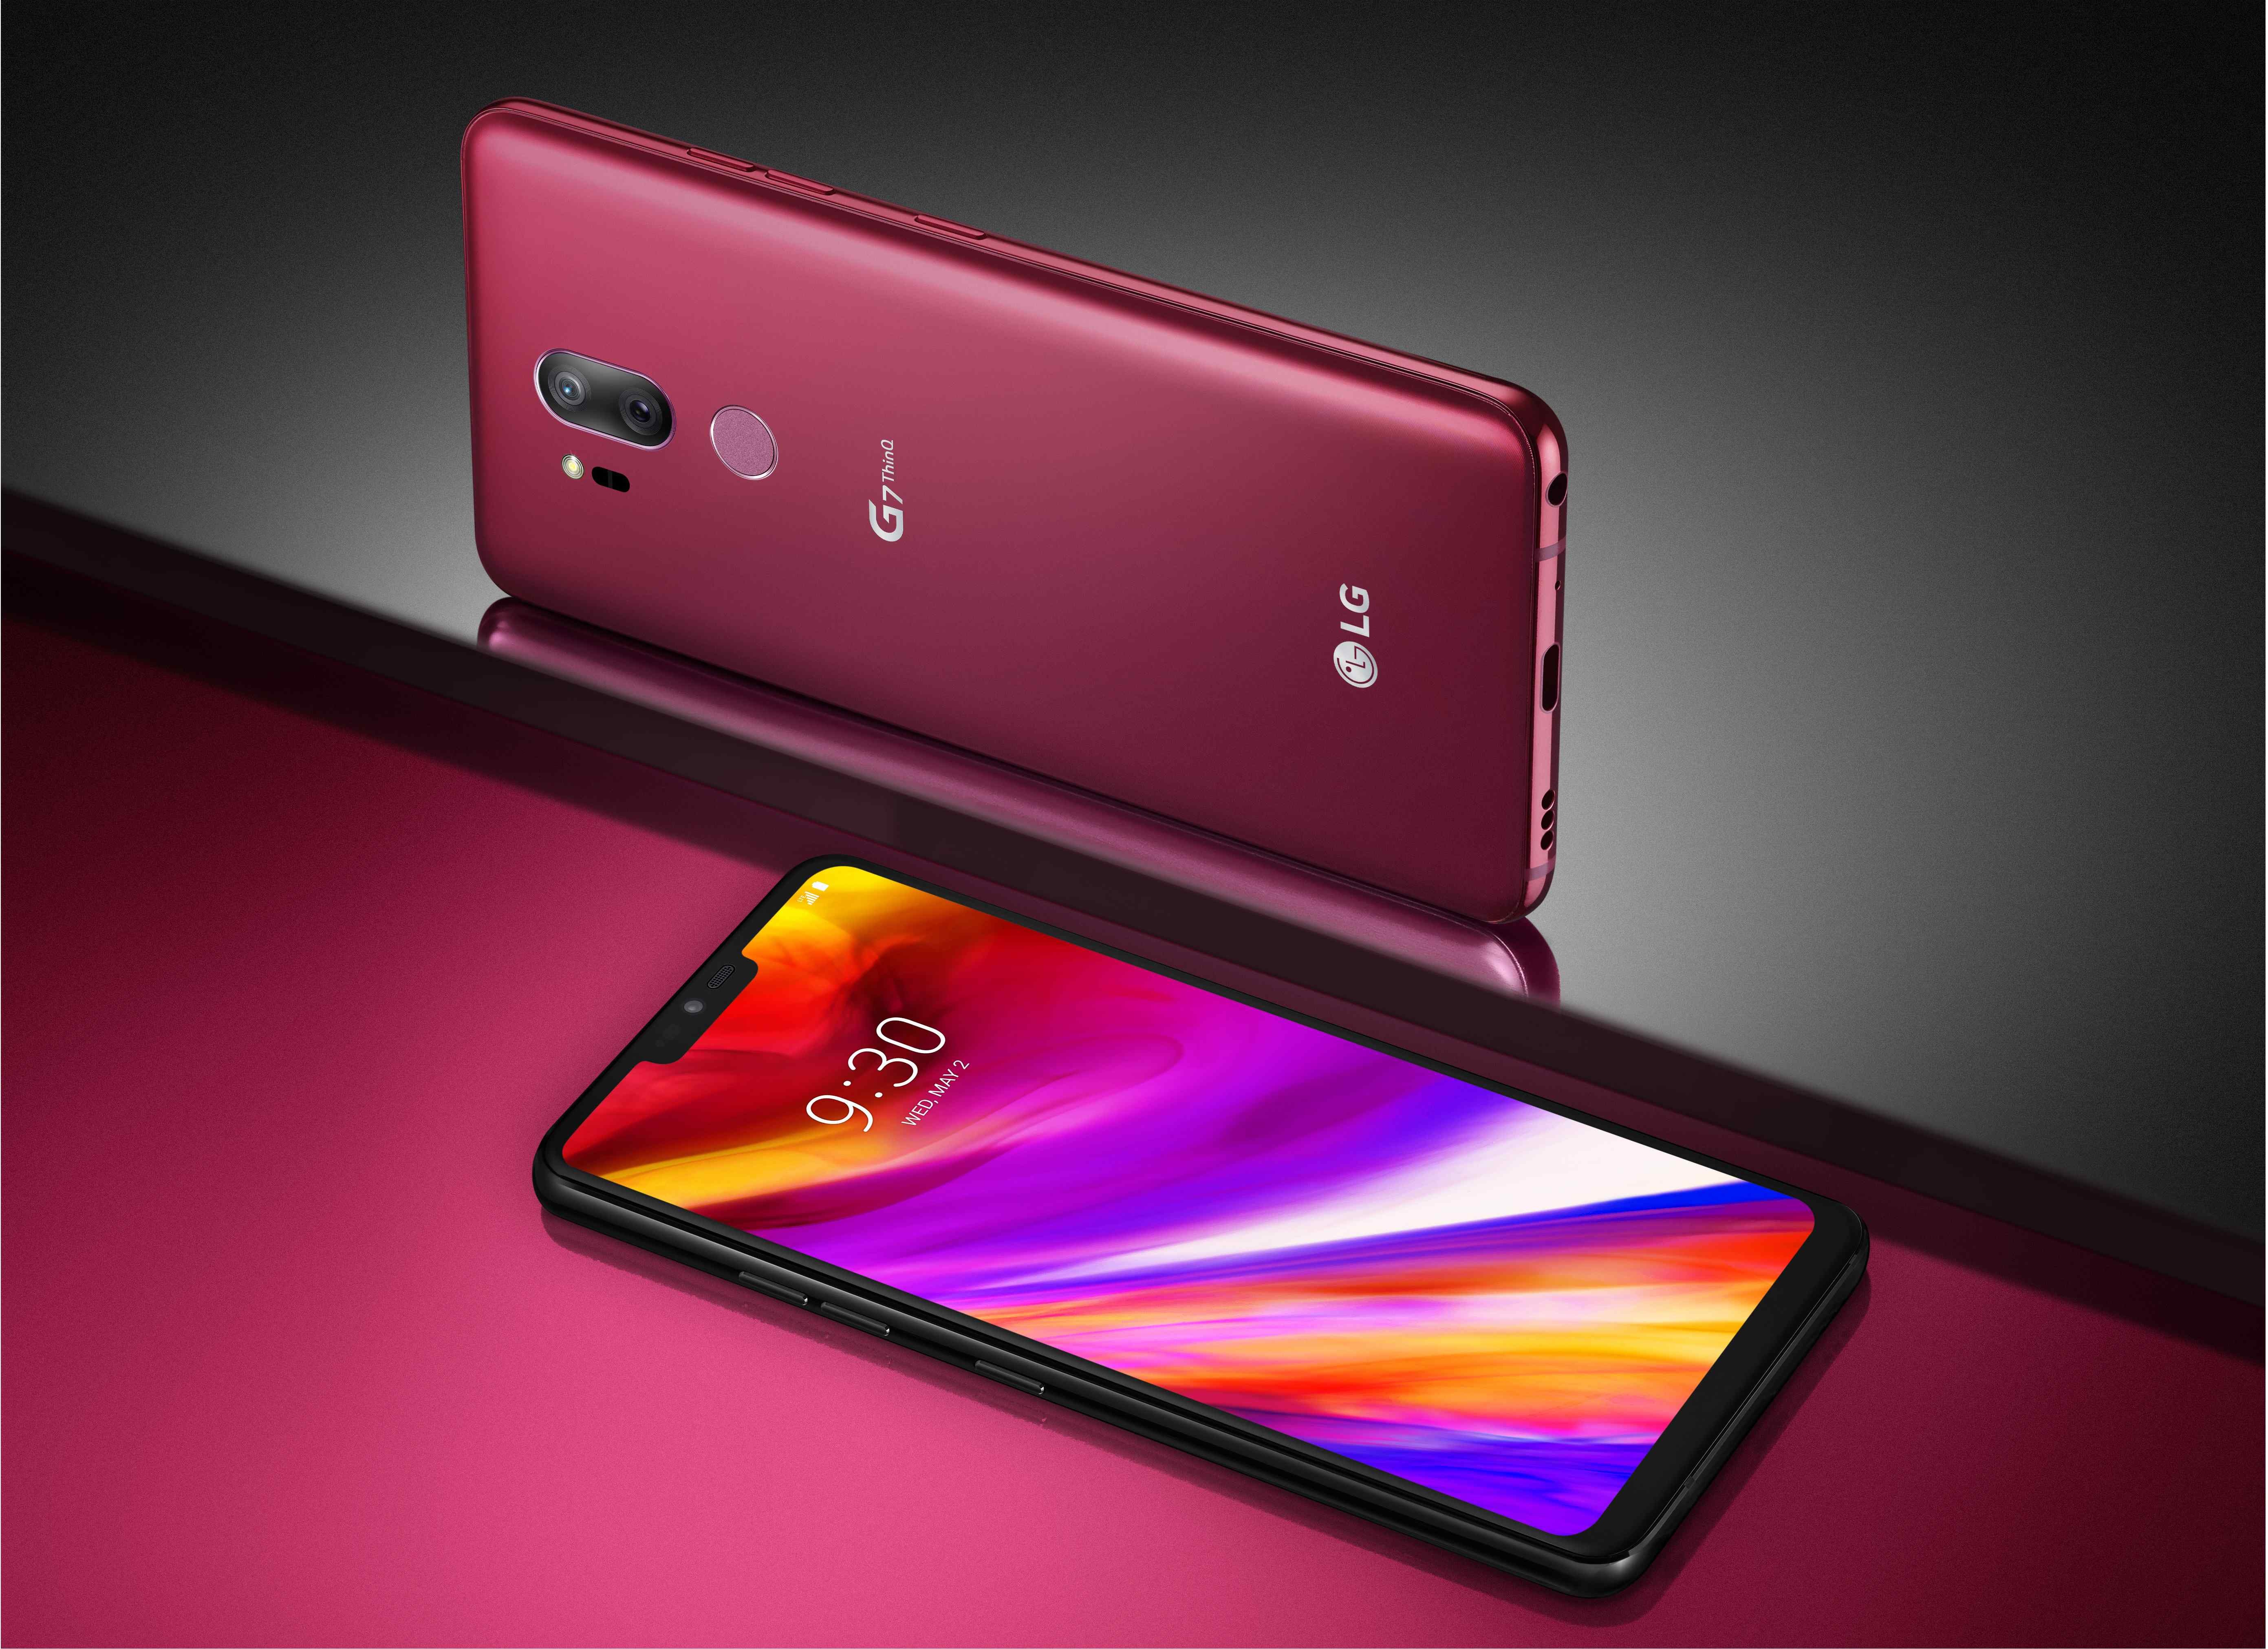 The front and rear view of the LG G7 ThinQ in Raspberry Rose against a gray and pink background